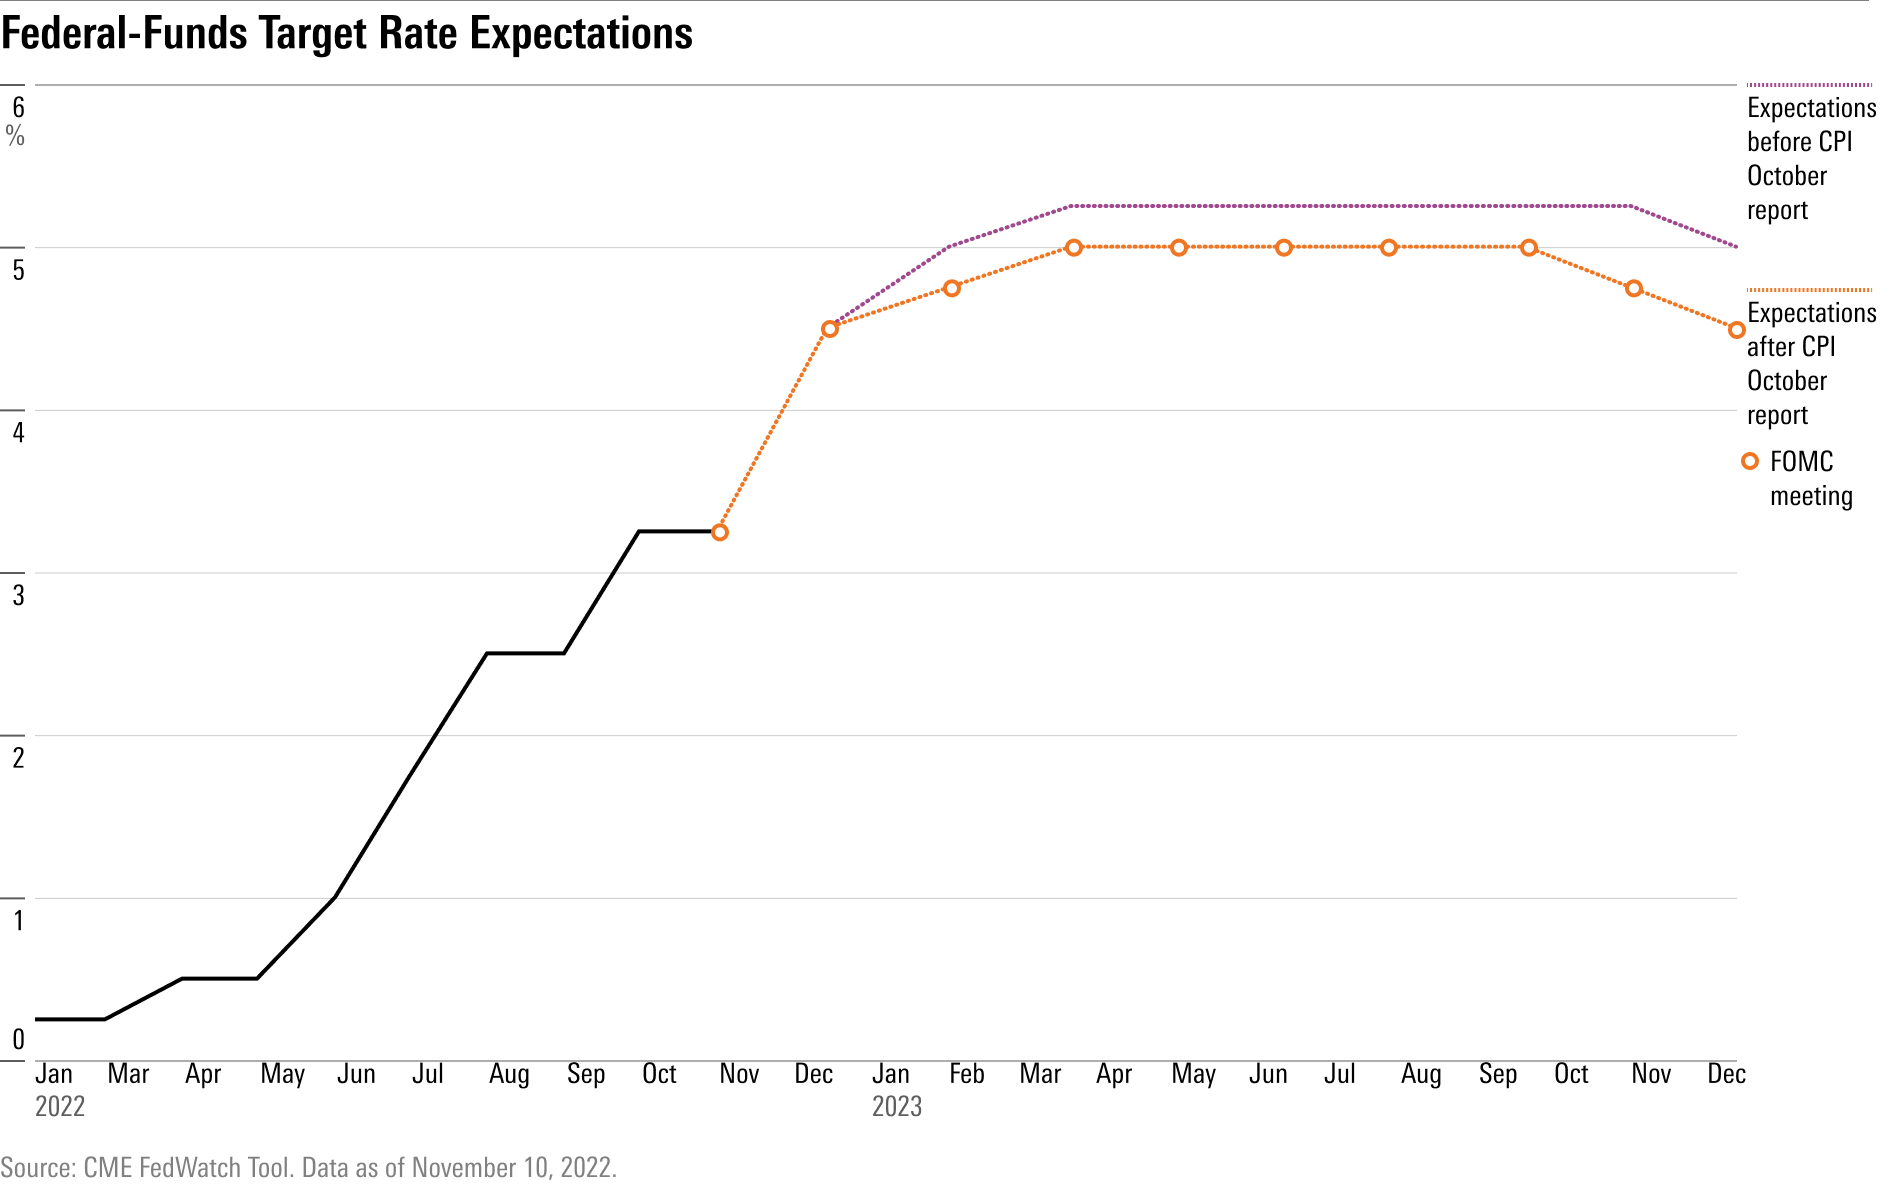 Line chart showing federal-funds target rate expectations over time.